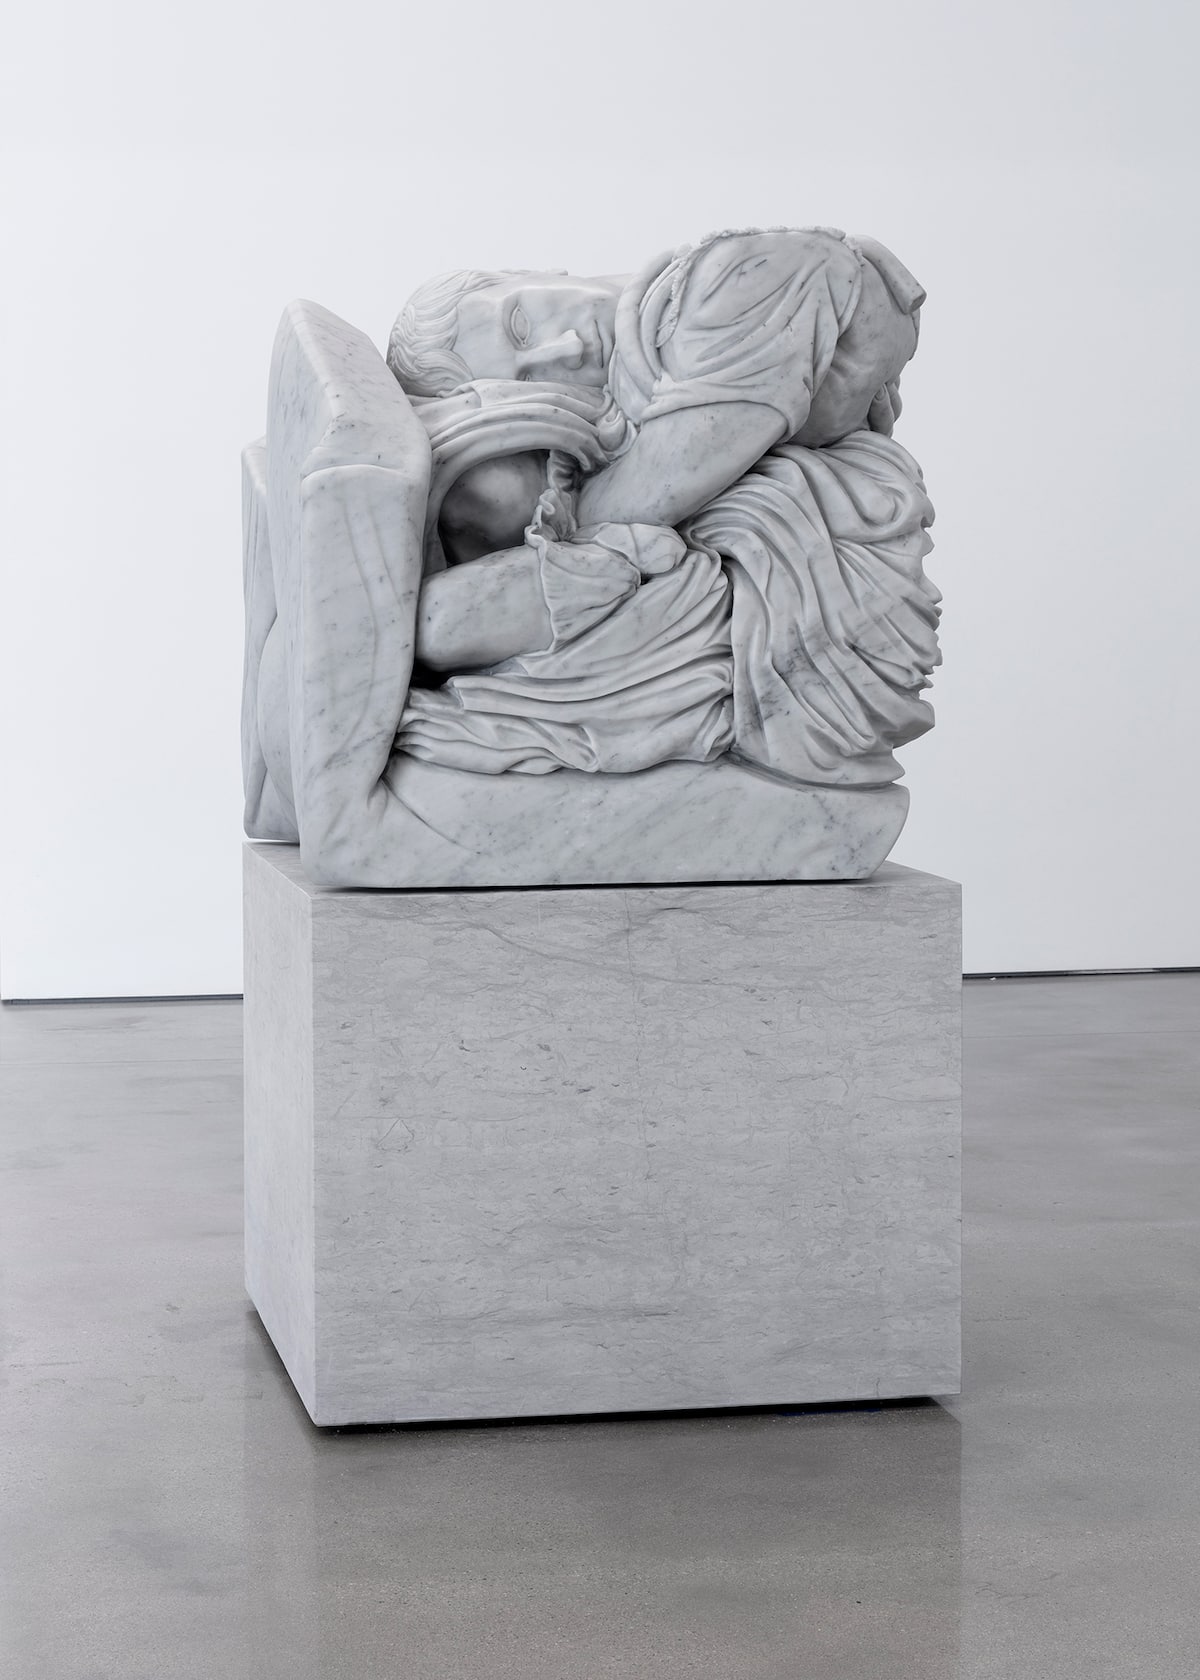 Artist Adam Parker Smith Compresses Classical Sculptures Into Small Marble Cubes (1)